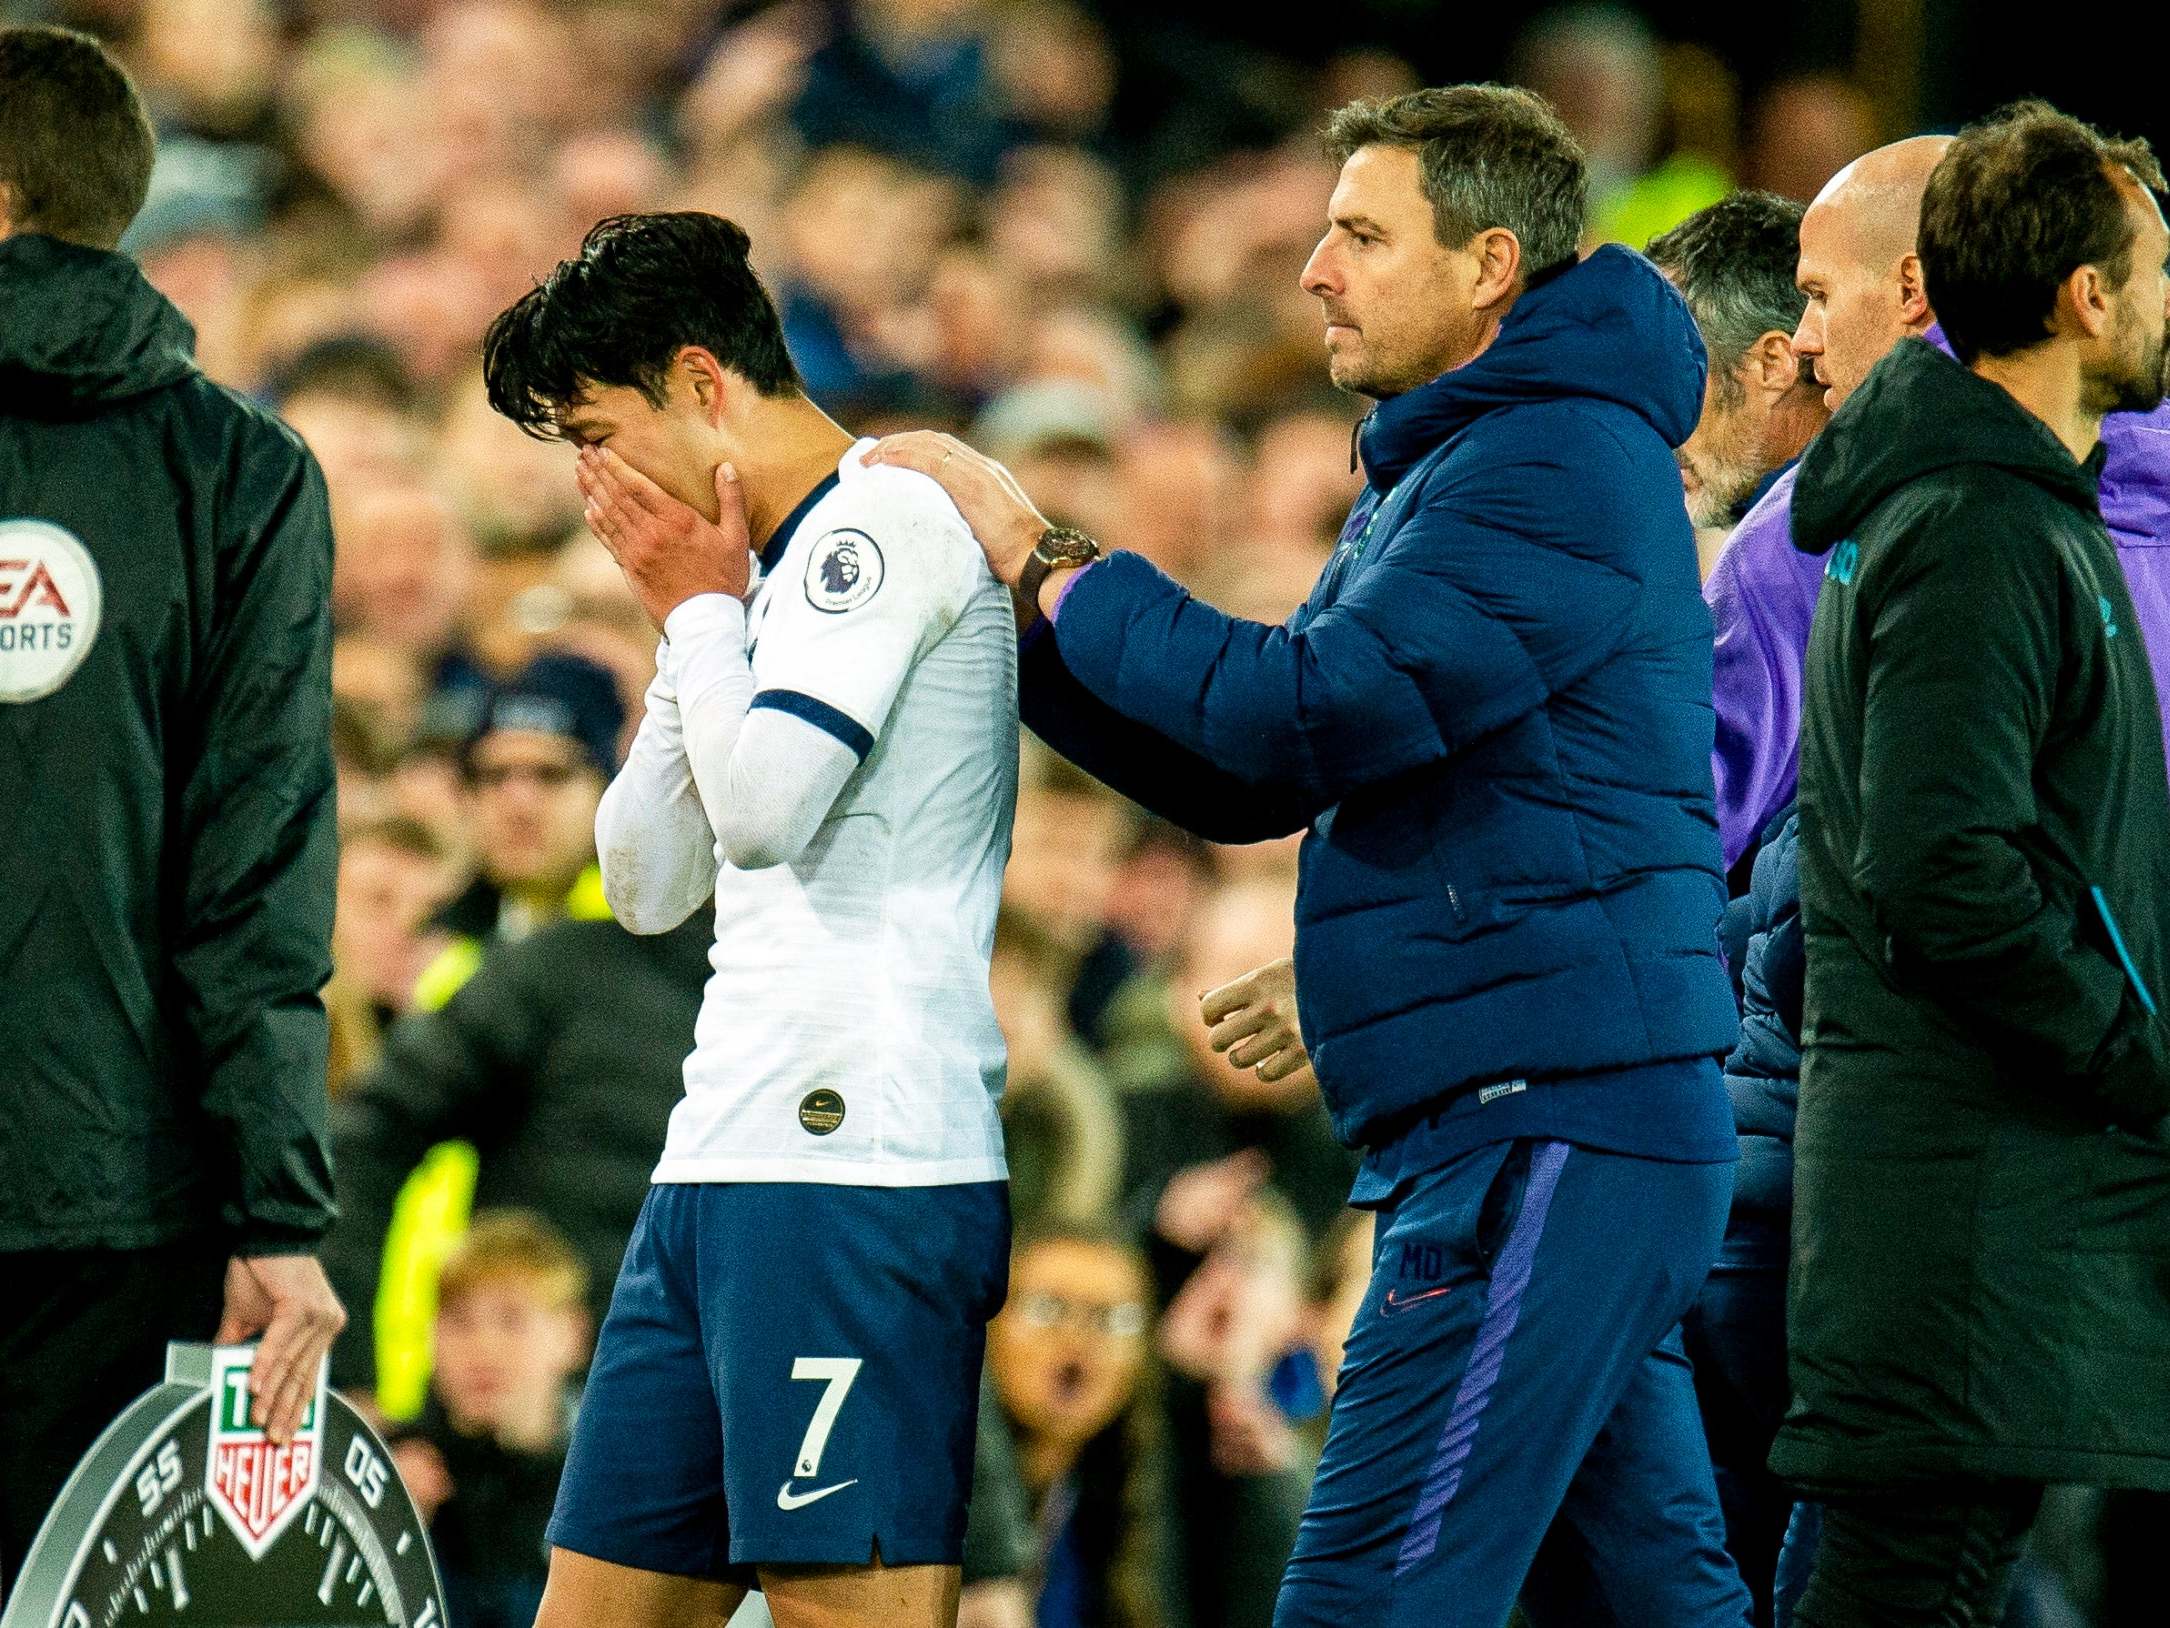 Son Heung-min reacts after the incident at Goodison Park